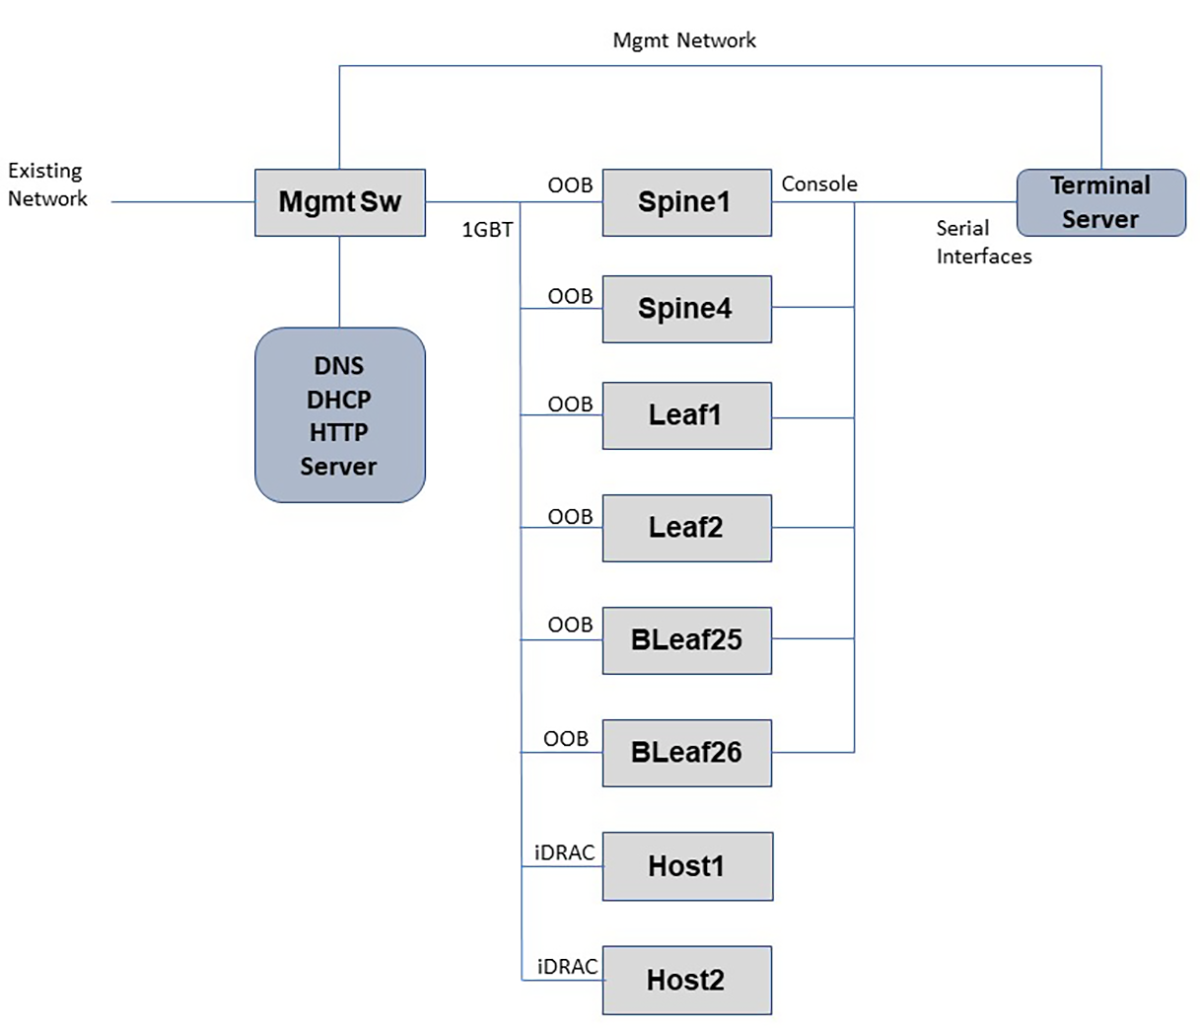 Management network topology